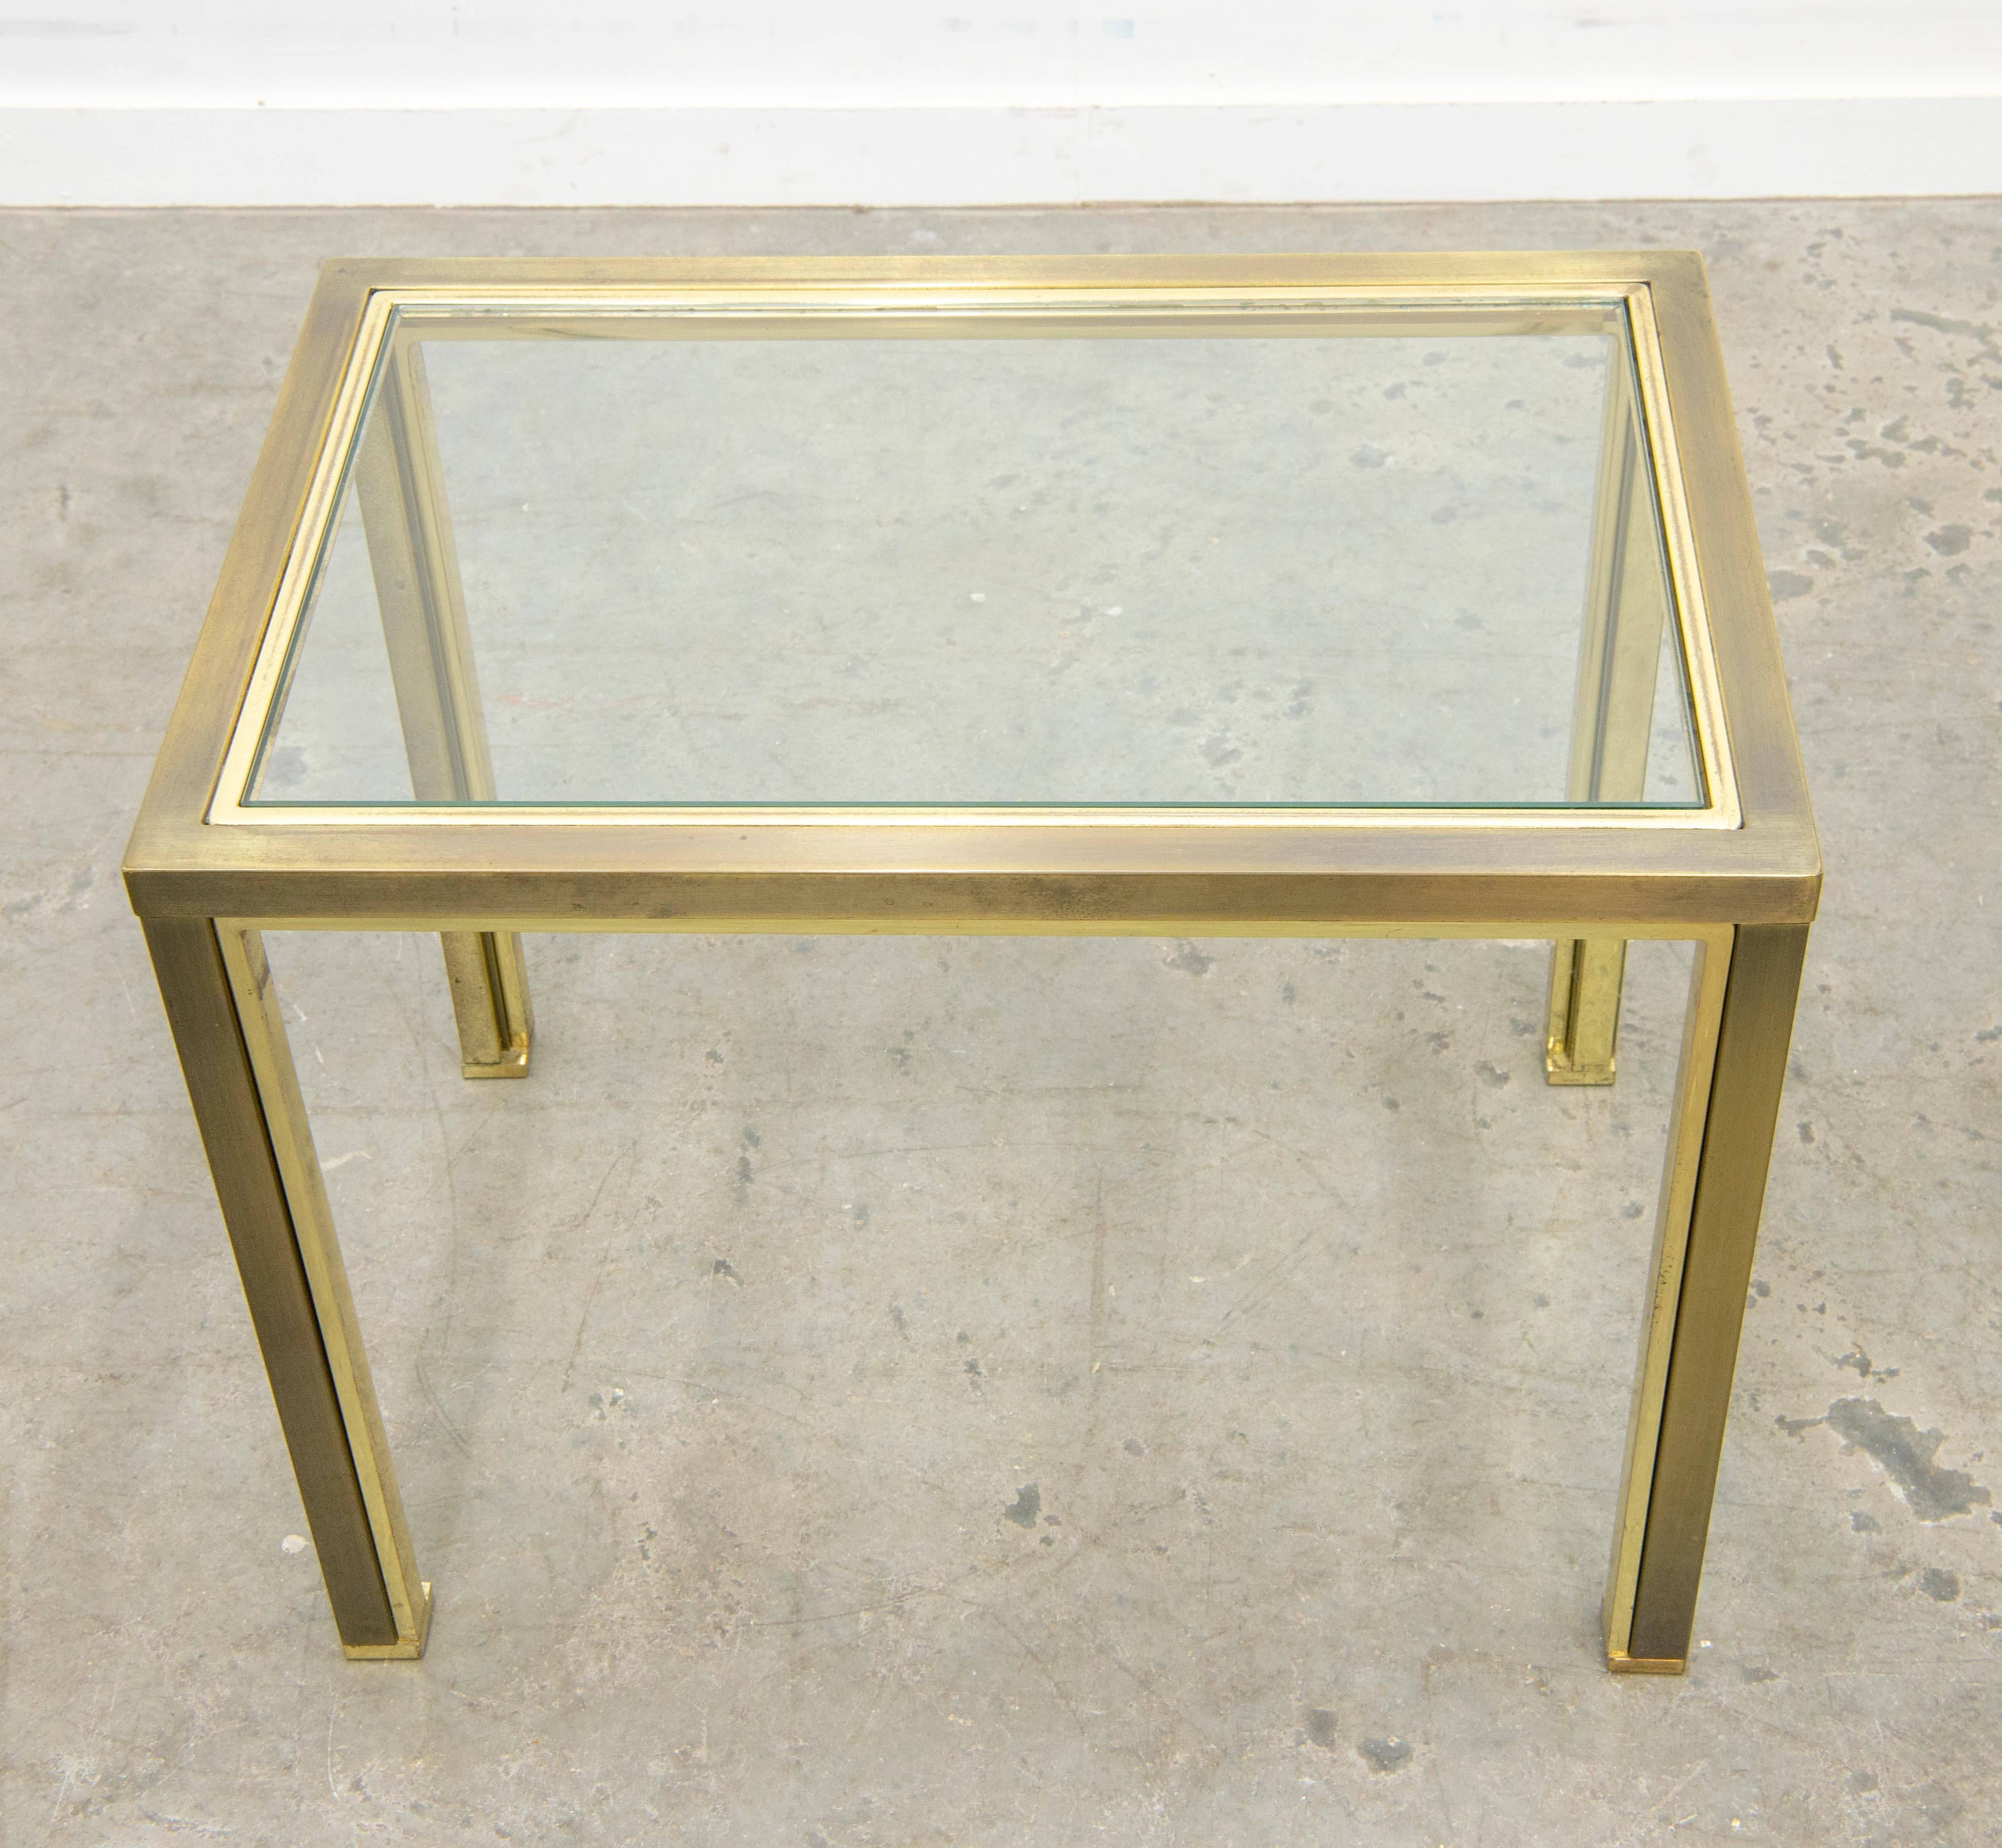 This table was made circa 1980 by Belgo Chrome in Belgium. It is made of a gold plated base in metal, with a glass top. The glass is see-trough. The frame is in overall good condition with use marks on it. There are some spots where the gold-plating